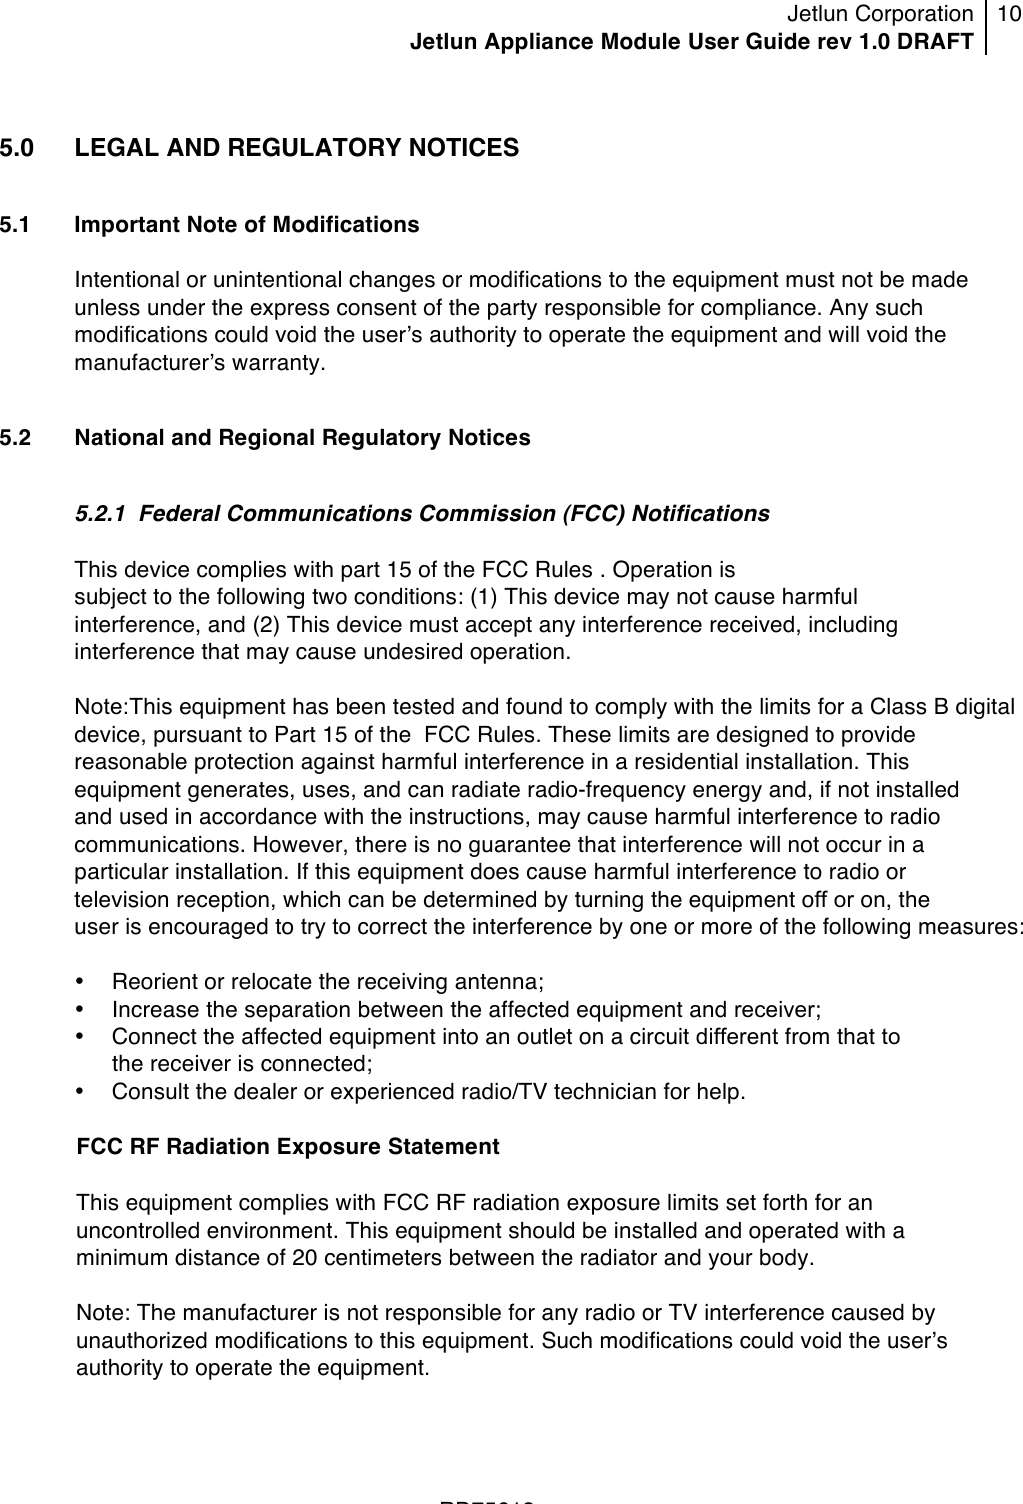 Jetlun Corporation Jetlun Appliance Module User Guide rev 1.0 DRAFT 10   !!!RD75613 !5.0  LEGAL AND REGULATORY NOTICES  5.1 Important Note of Modifications  Intentional or unintentional changes or modifications to the equipment must not be made unless under the express consent of the party responsible for compliance. Any such modifications could void the userʼs authority to operate the equipment and will void the manufacturerʼs warranty.  5.2 National and Regional Regulatory Notices  5.2.1  Federal Communications Commission (FCC) Notifications   This device complies with part 15 of the FCC Rules . Operation is subject to the following two conditions: (1) This device may not cause harmful interference, and (2) This device must accept any interference received, including interference that may cause undesired operation.  Note:This equipment has been tested and found to comply with the limits for a Class B digital device, pursuant to Part 15 of the  FCC Rules. These limits are designed to provide reasonable protection against harmful interference in a residential installation. This equipment generates, uses, and can radiate radio-frequency energy and, if not installed and used in accordance with the instructions, may cause harmful interference to radio communications. However, there is no guarantee that interference will not occur in a particular installation. If this equipment does cause harmful interference to radio or television reception, which can be determined by turning the equipment off or on, the user is encouraged to try to correct the interference by one or more of the following measures:  • Reorient or relocate the receiving antenna; • Increase the separation between the affected equipment and receiver; • Connect the affected equipment into an outlet on a circuit different from that to the receiver is connected; • Consult the dealer or experienced radio/TV technician for help.  FCC RF Radiation Exposure Statement     This equipment complies with FCC RF radiation exposure limits set forth for an uncontrolled environment. This equipment should be installed and operated with a minimum distance of 20 centimeters between the radiator and your body.     Note: The manufacturer is not responsible for any radio or TV interference caused by unauthorized modifications to this equipment. Such modifications could void the userʼs authority to operate the equipment.  